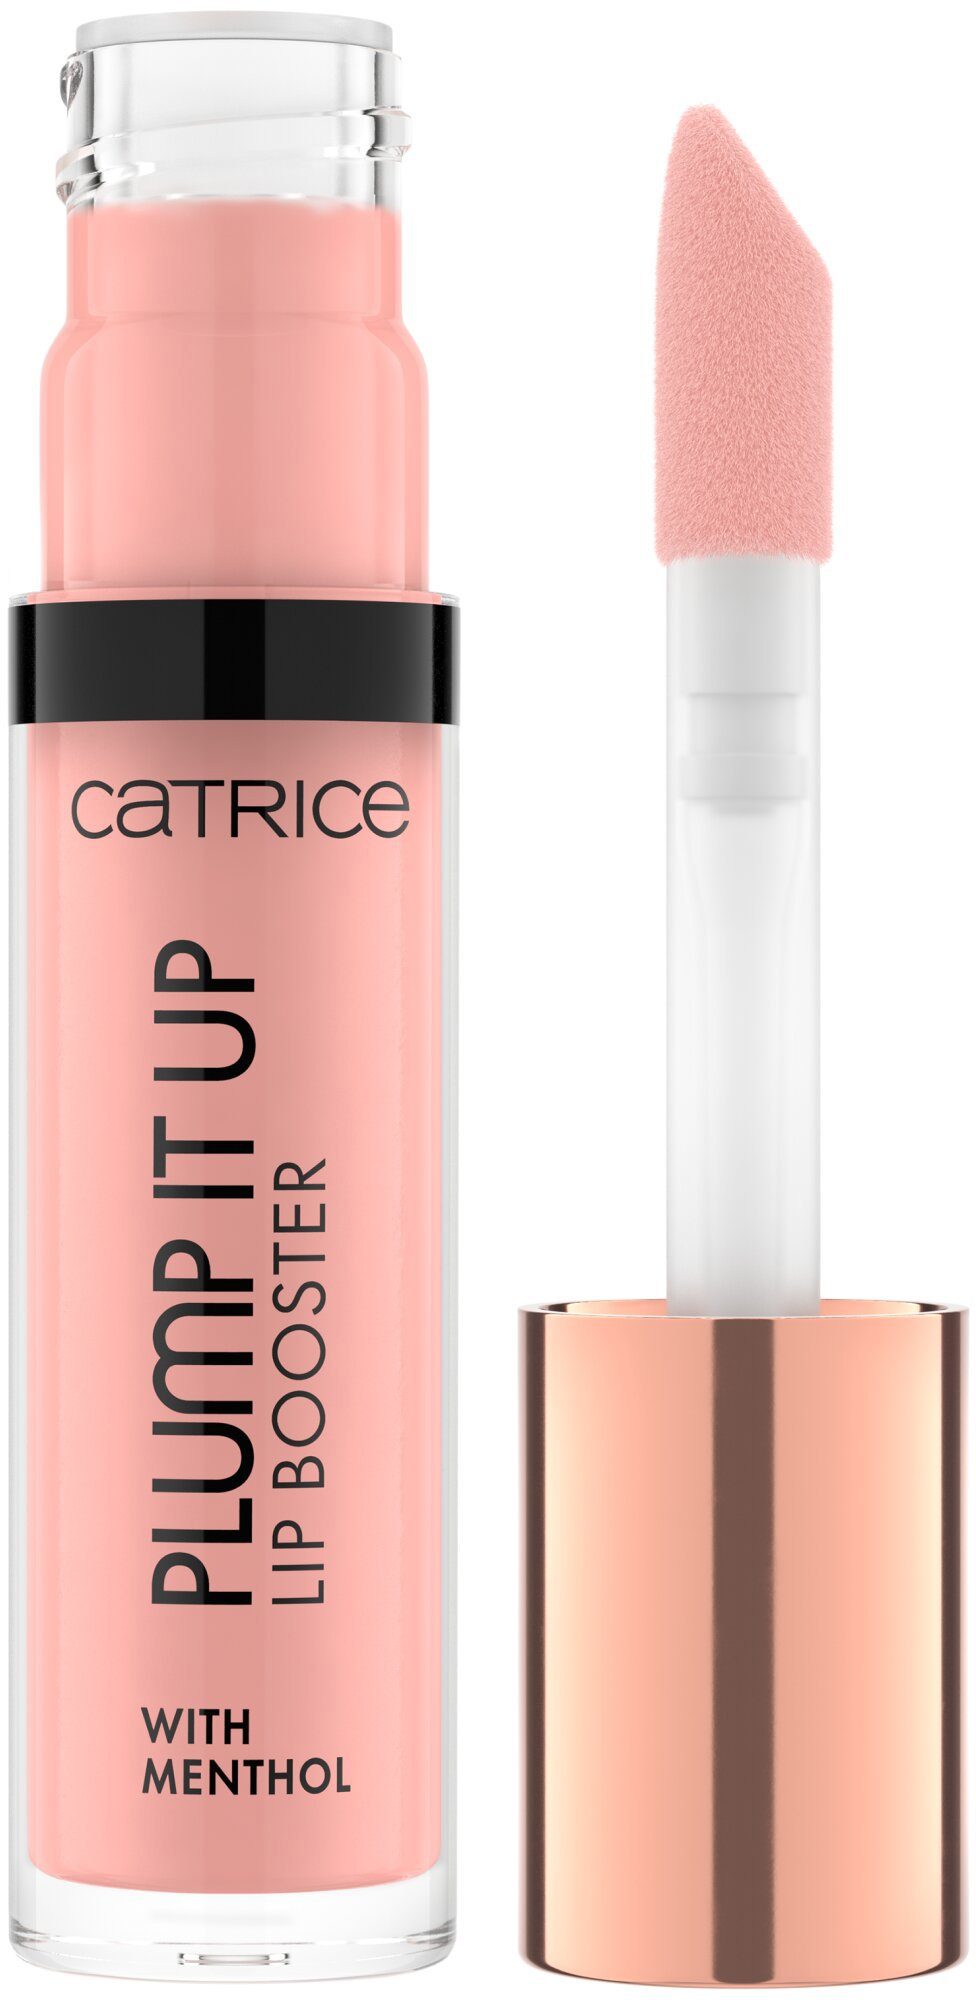 It Plump 3-tlg. Up Lip Booster, Lip-Booster Catrice